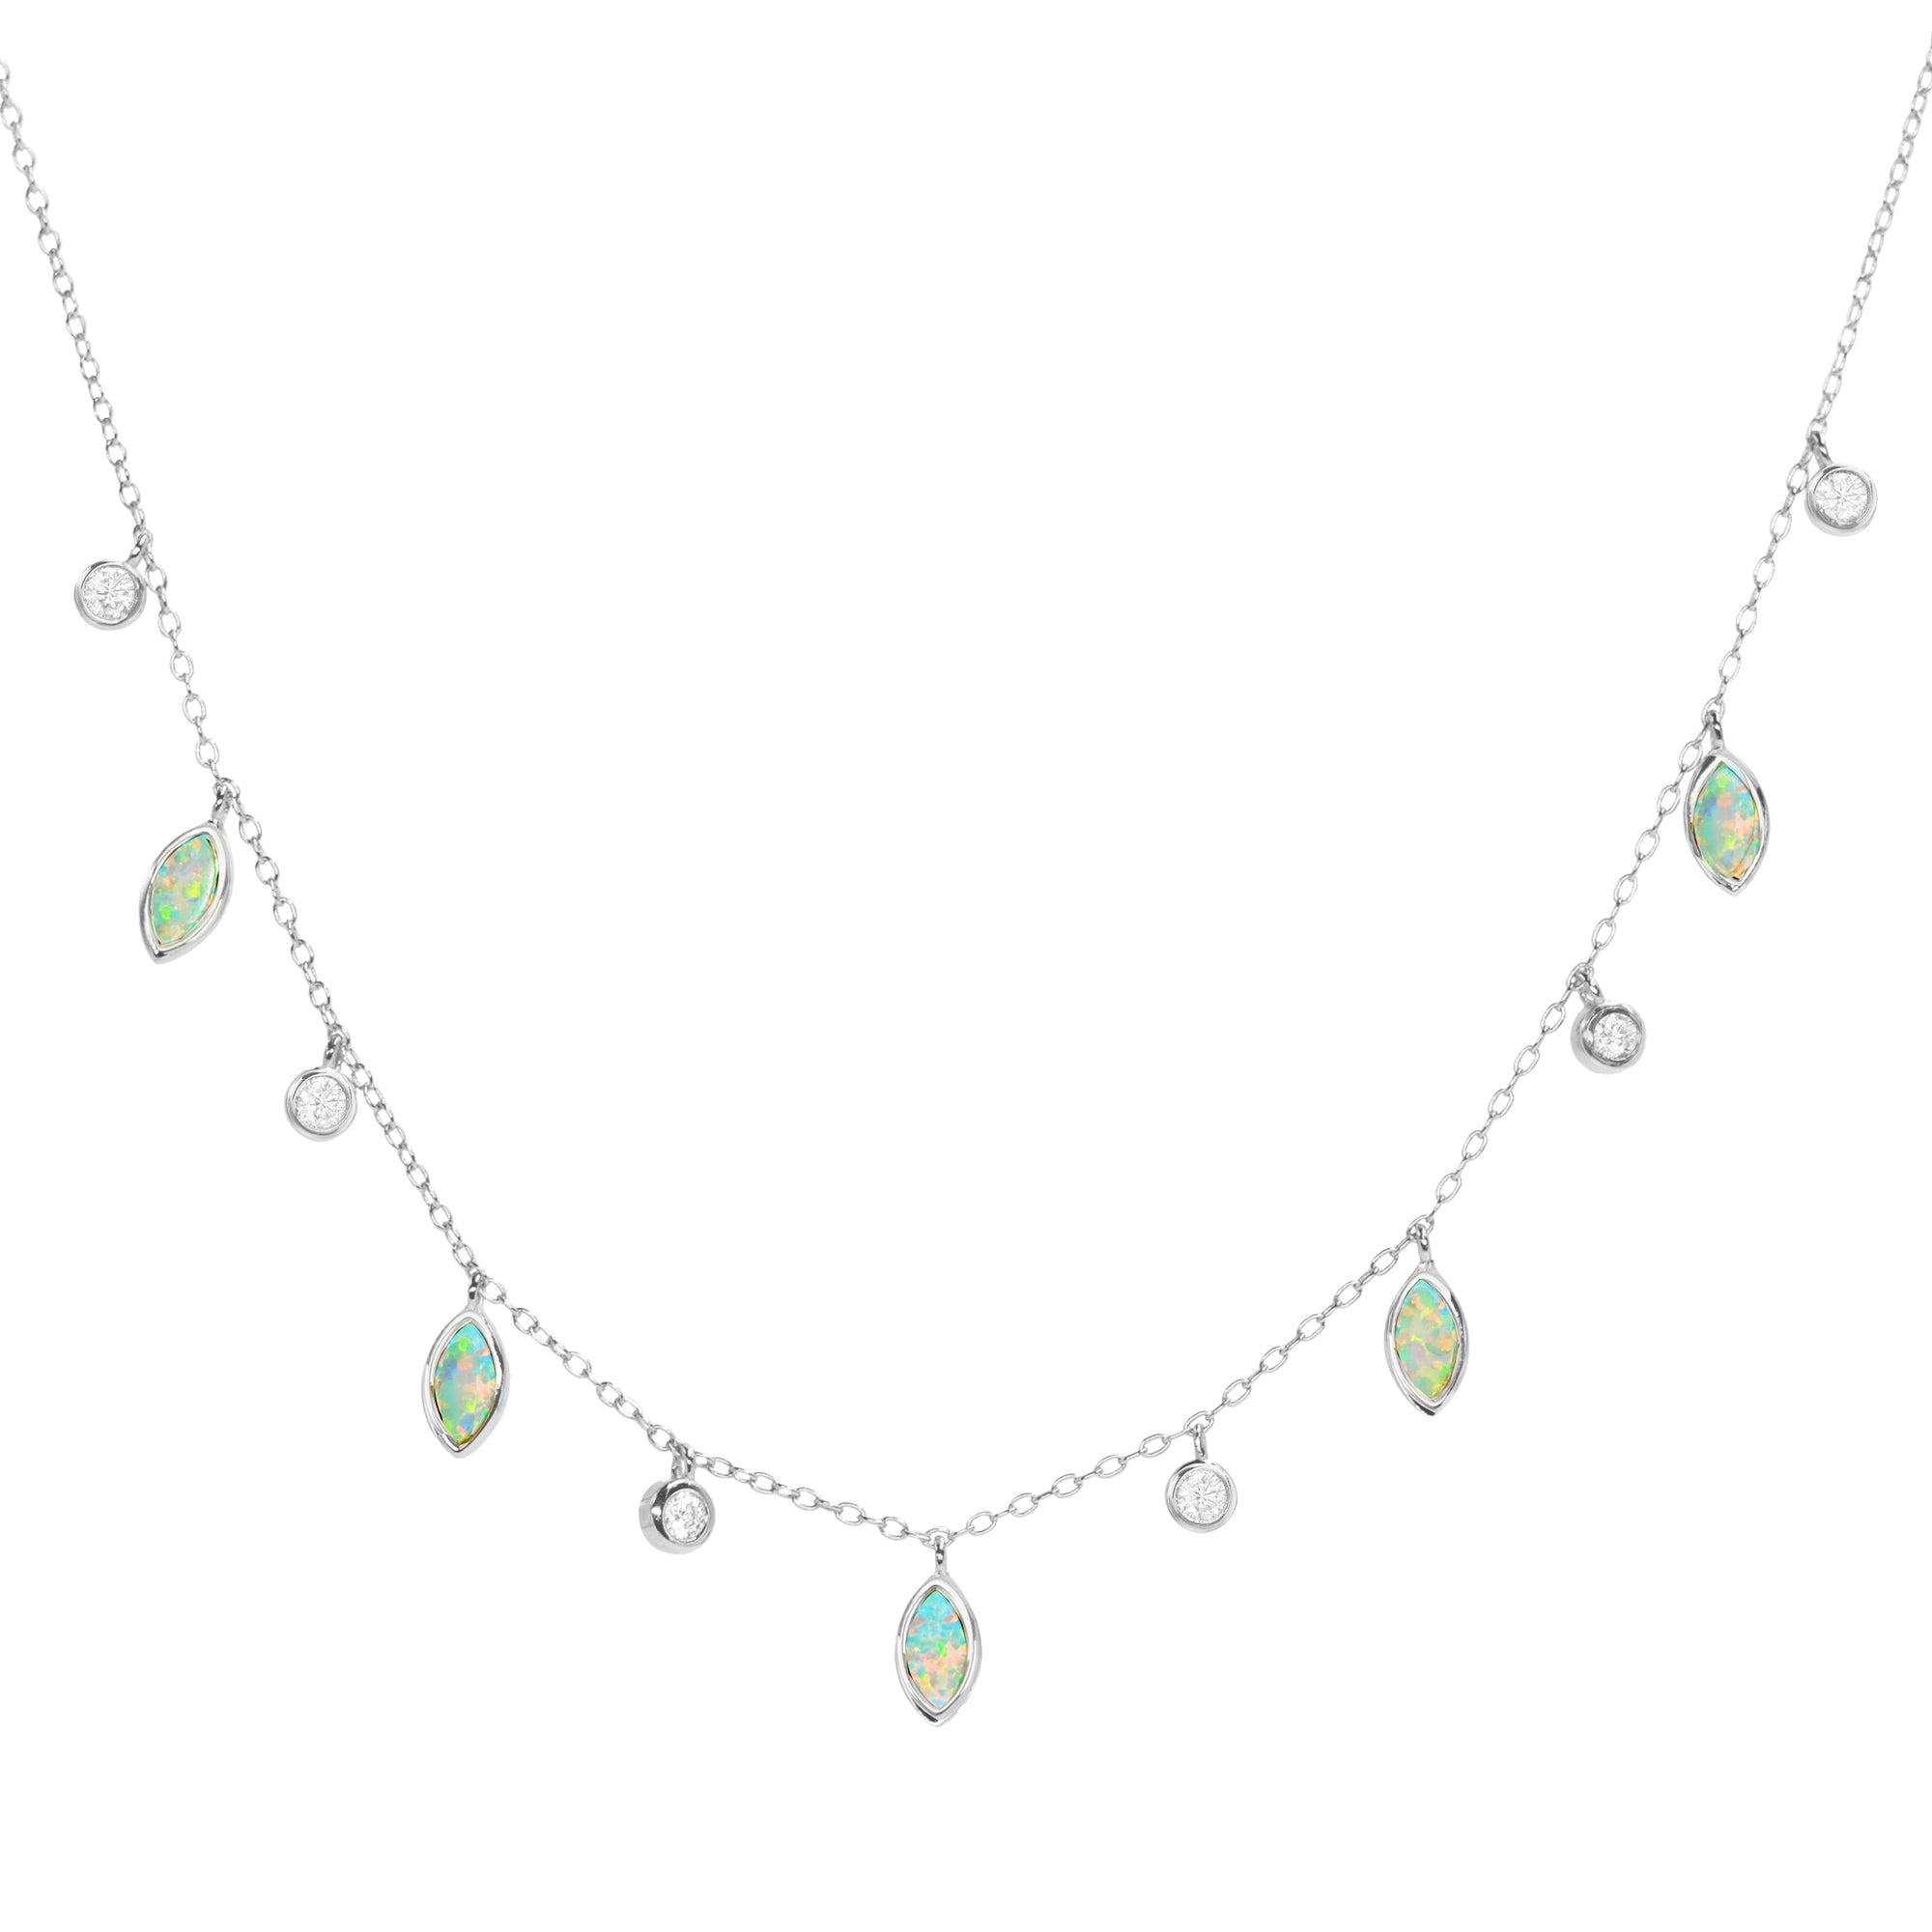 Drops of Spring Opal Necklace - KAMARIA